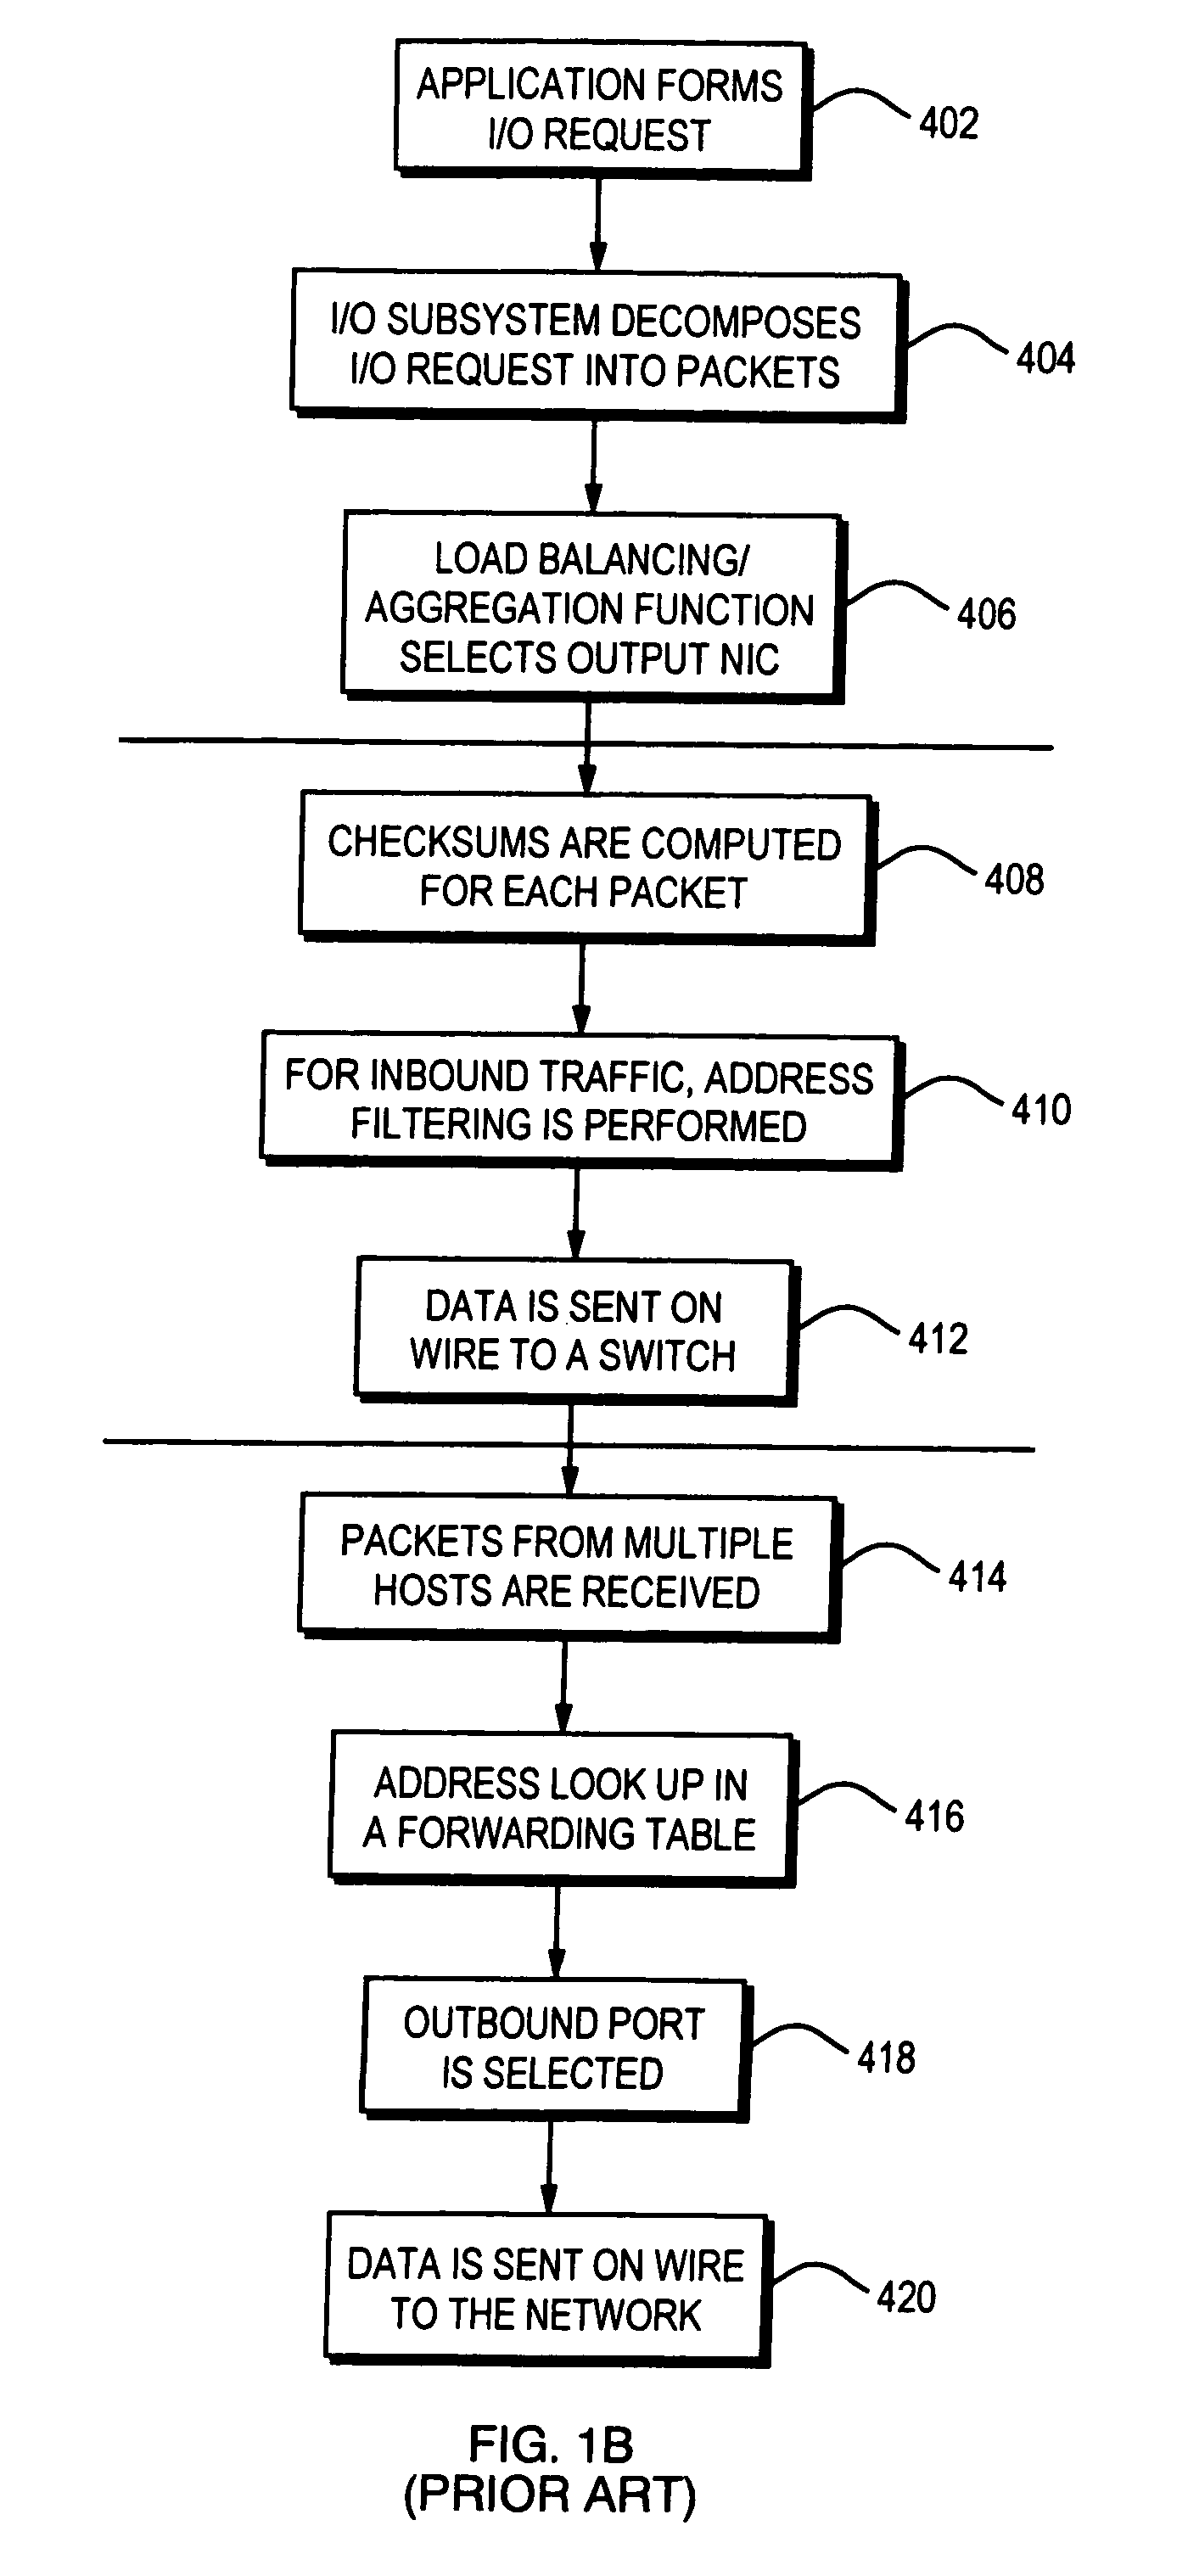 System and method for dynamic link aggregation in a shared I/O subsystem